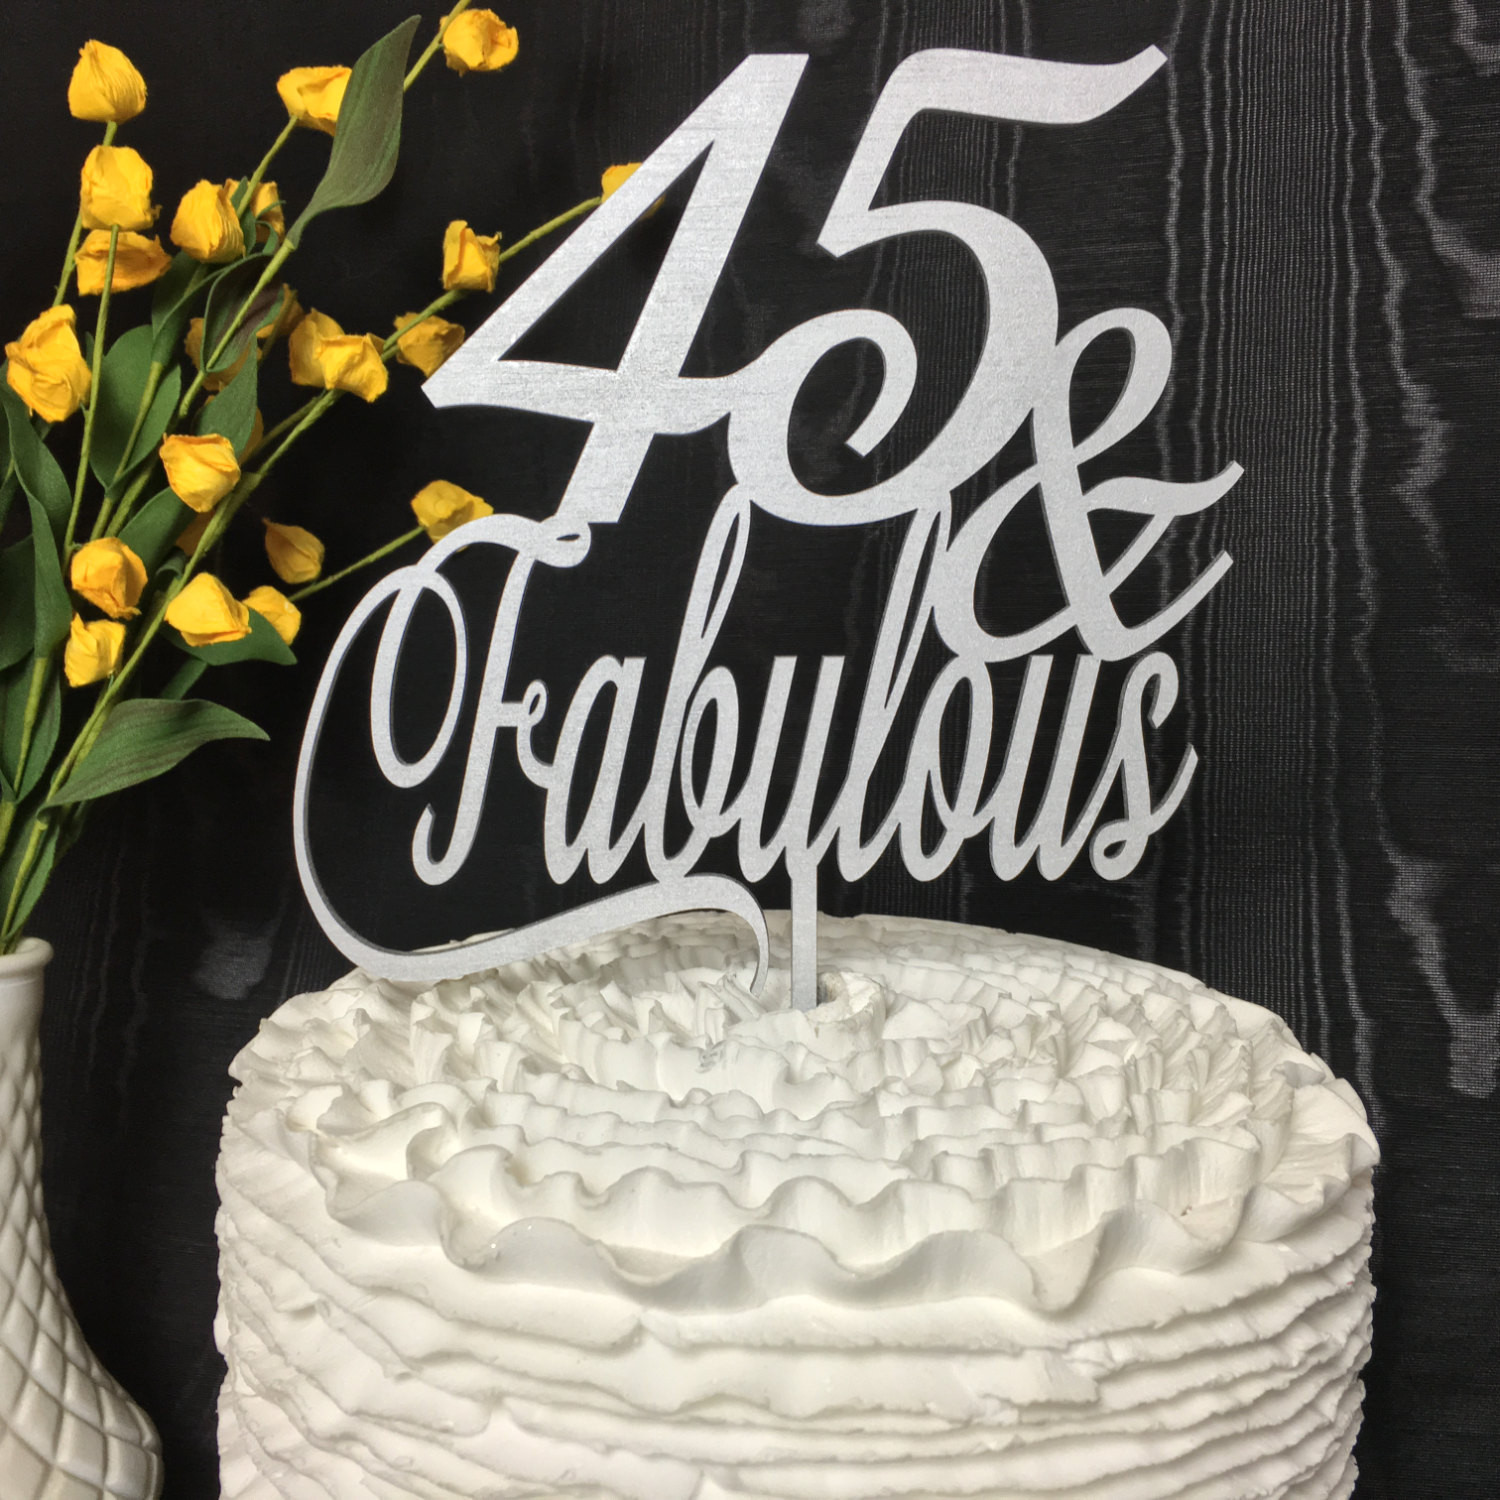 45th Birthday Party Ideas
 45th Cake Topper 45 & Fabulous Cake Topper 45th Birthday